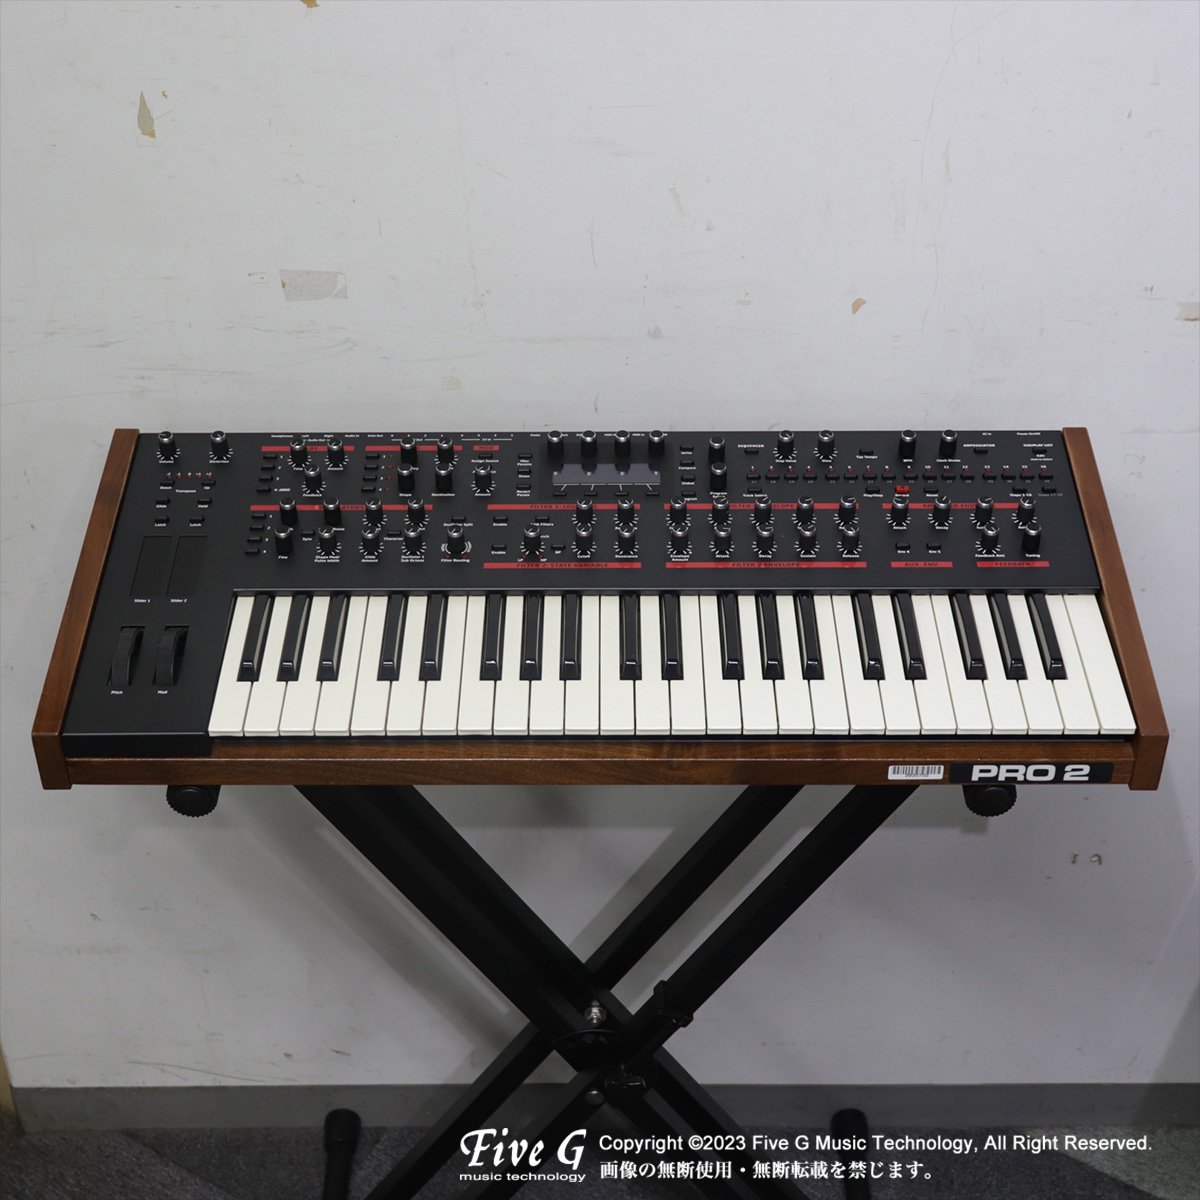 Five　Smith　Dave　キーボード　シンセサイザー　music　中古　Instruments　Pro　technology　Used　G